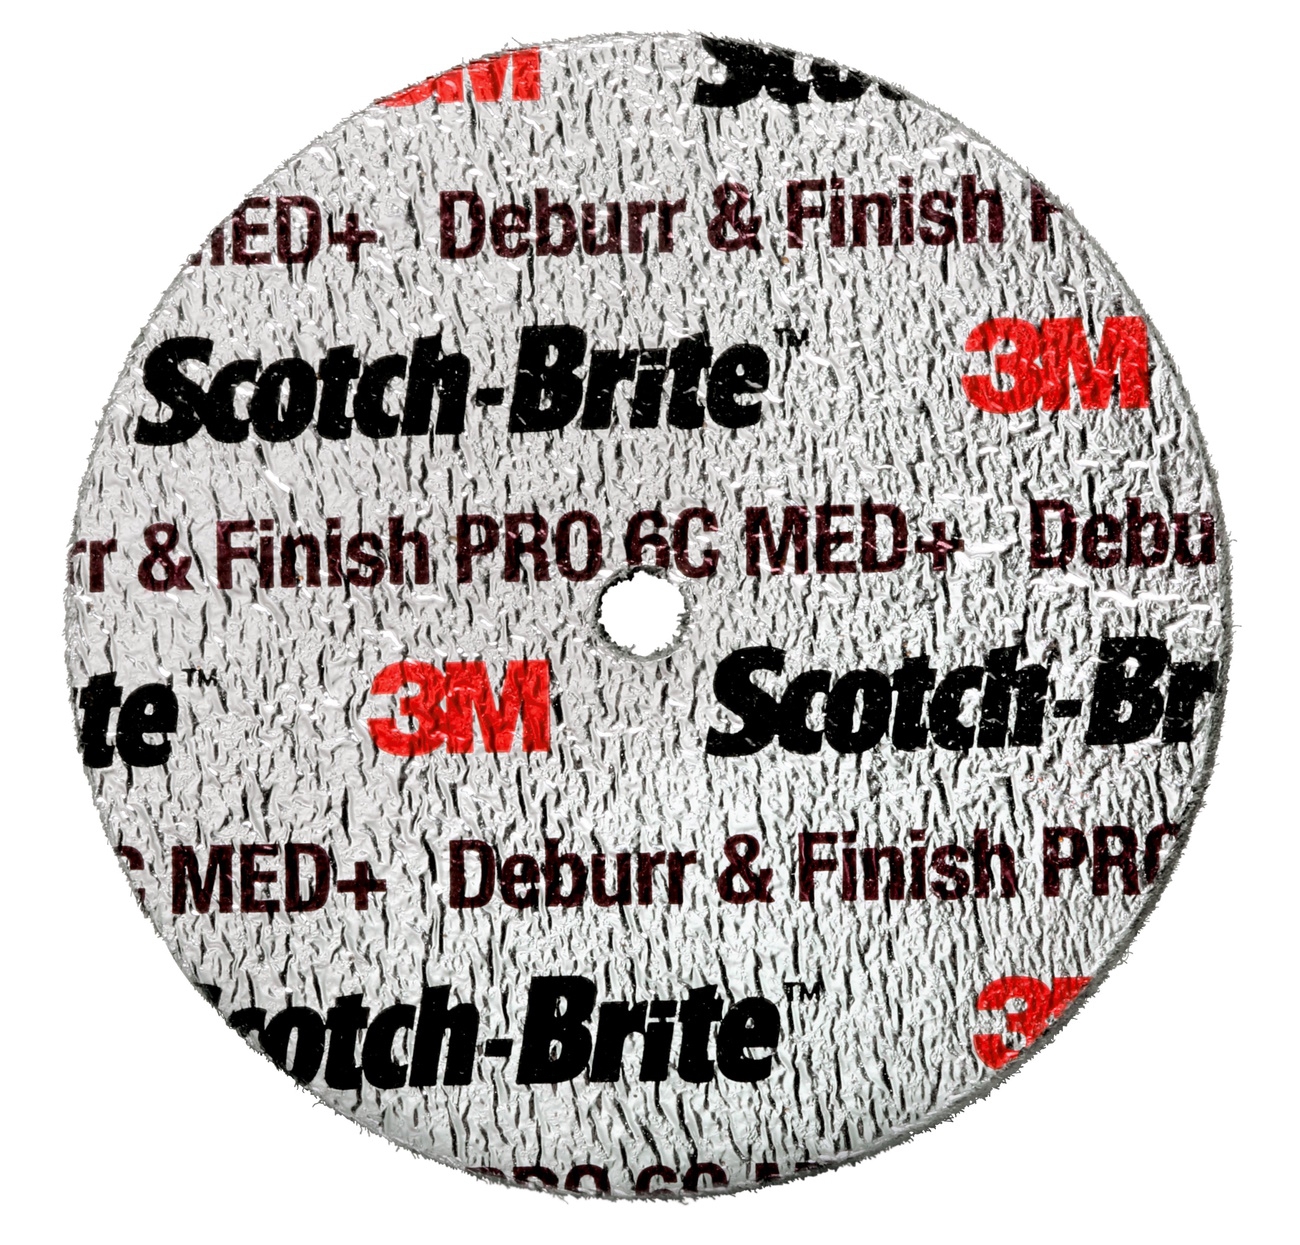 3M Scotch-Brite Deburr and Finish PRO compact disc DP-UW, 75 mm x 12,7 mm x 6,35 mm, 4C MED+